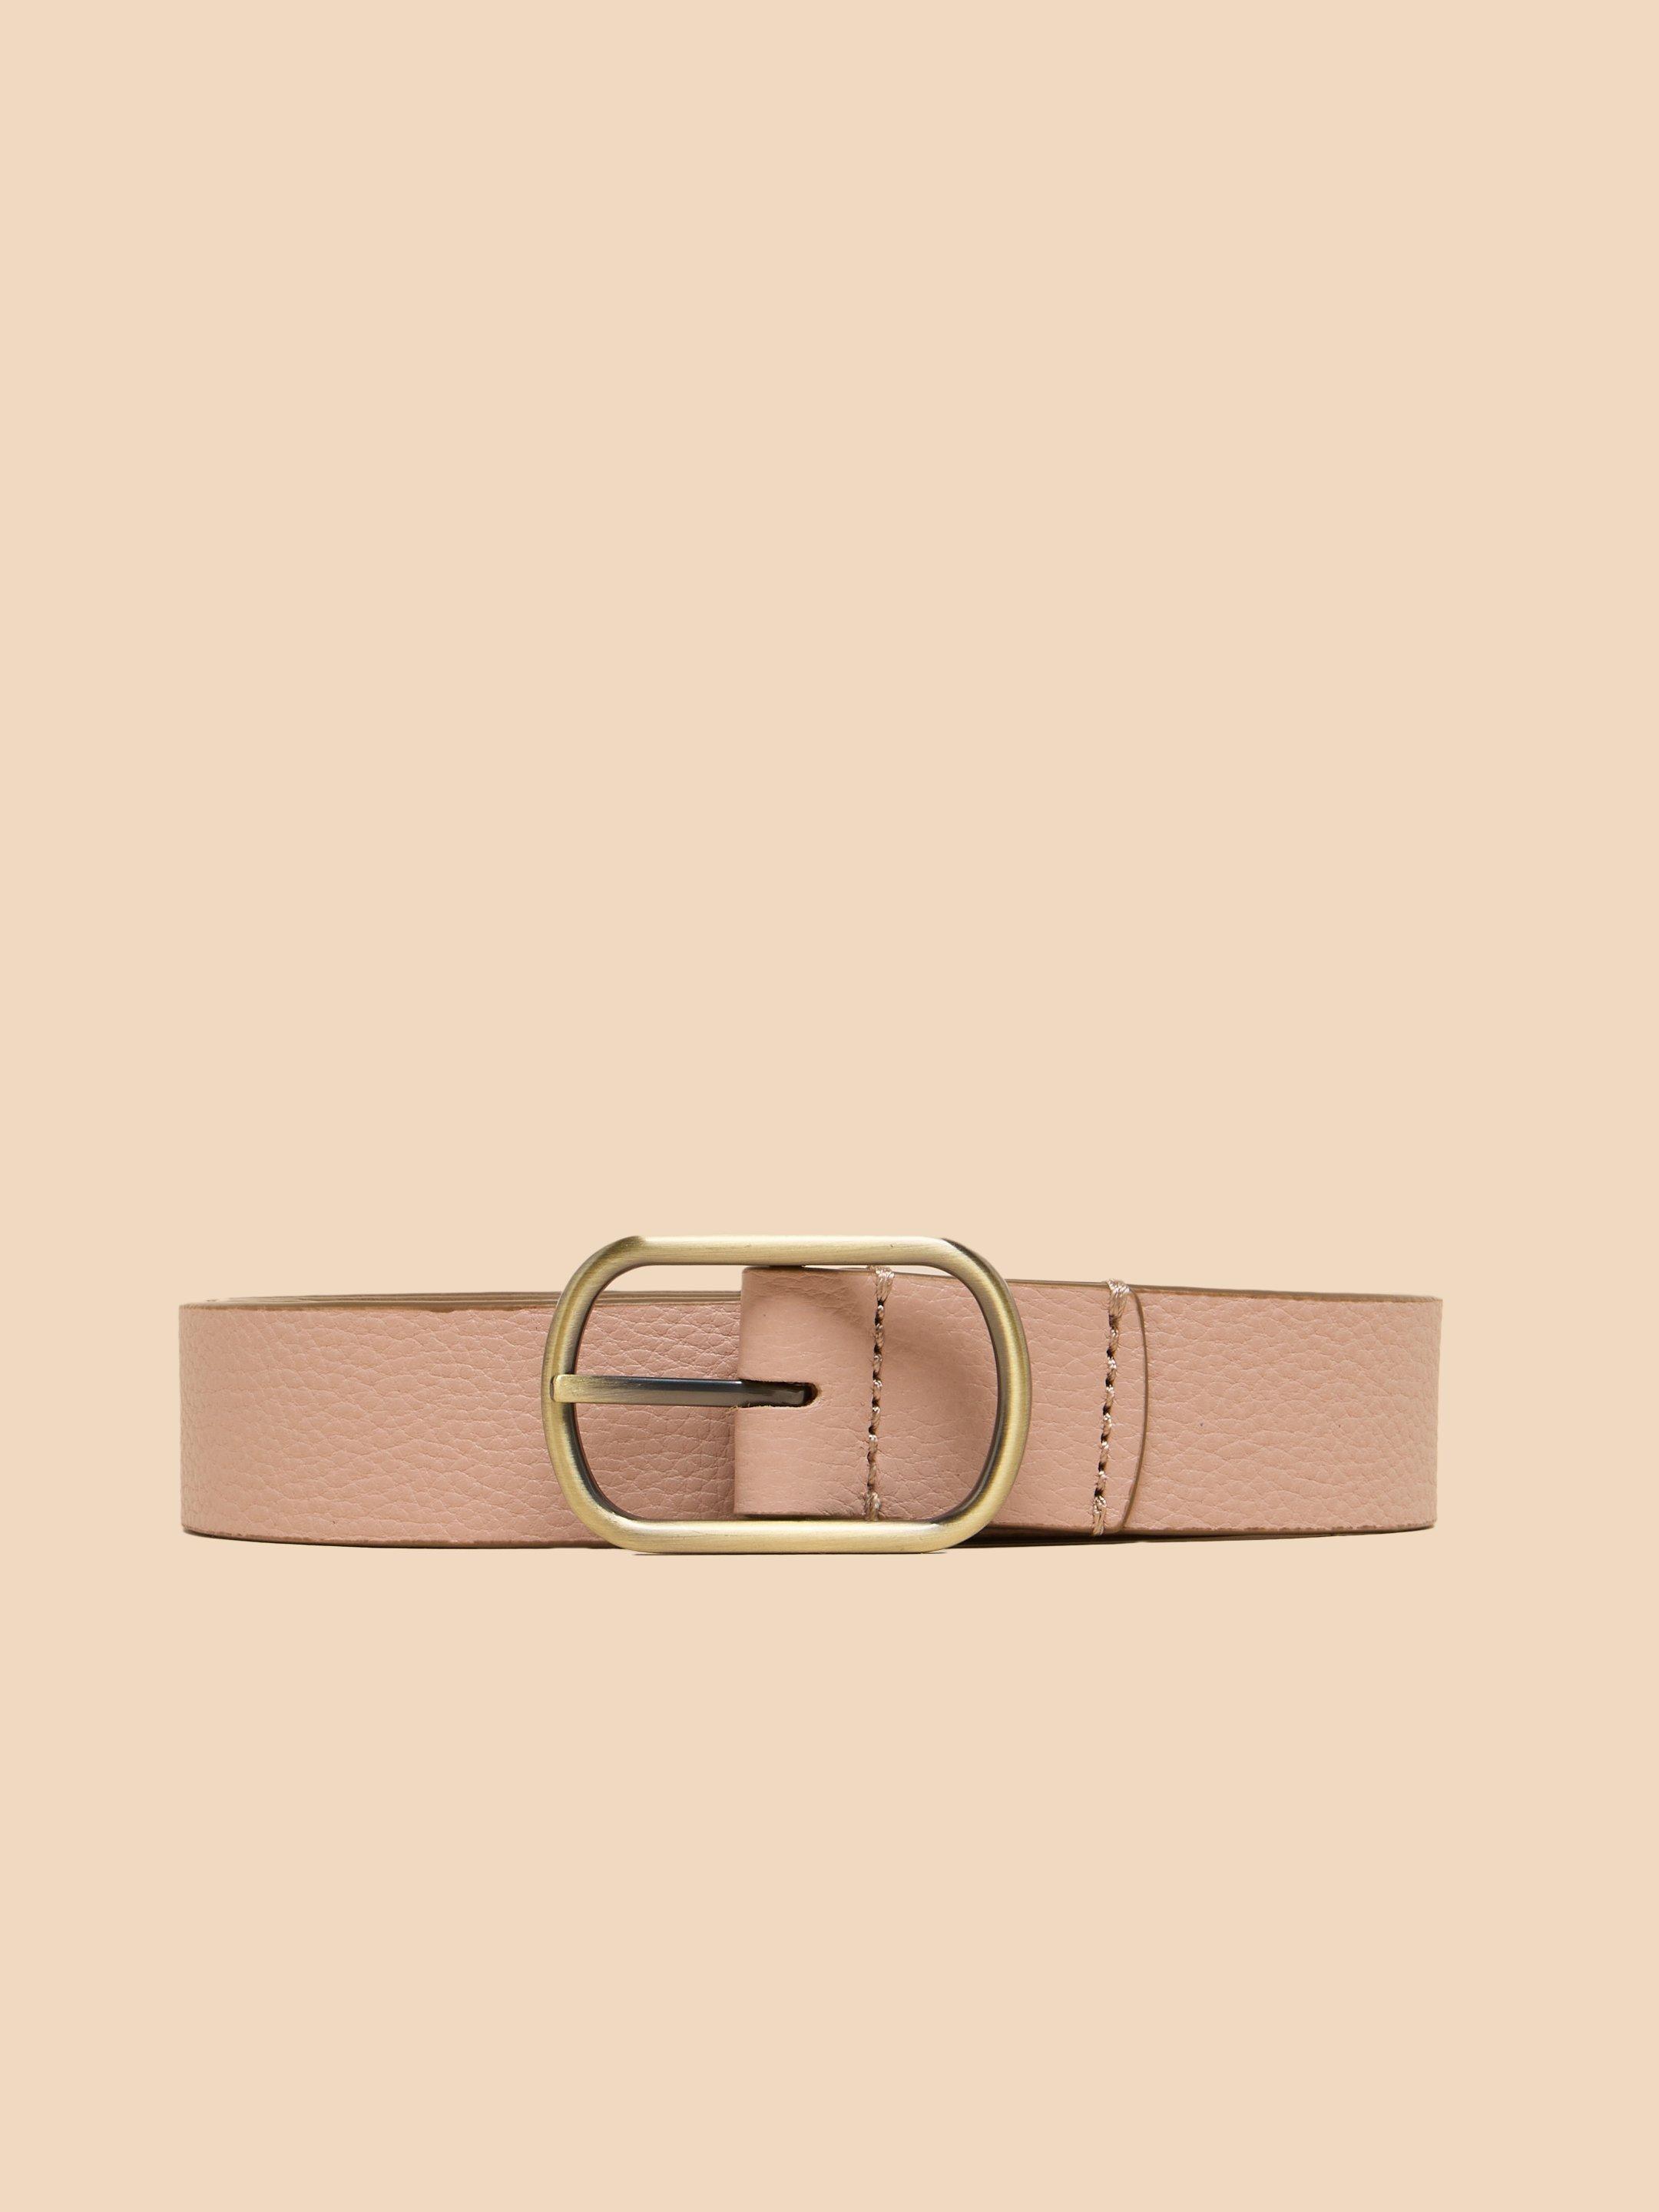 Leather belt for women, the new accessory that cannot be missing